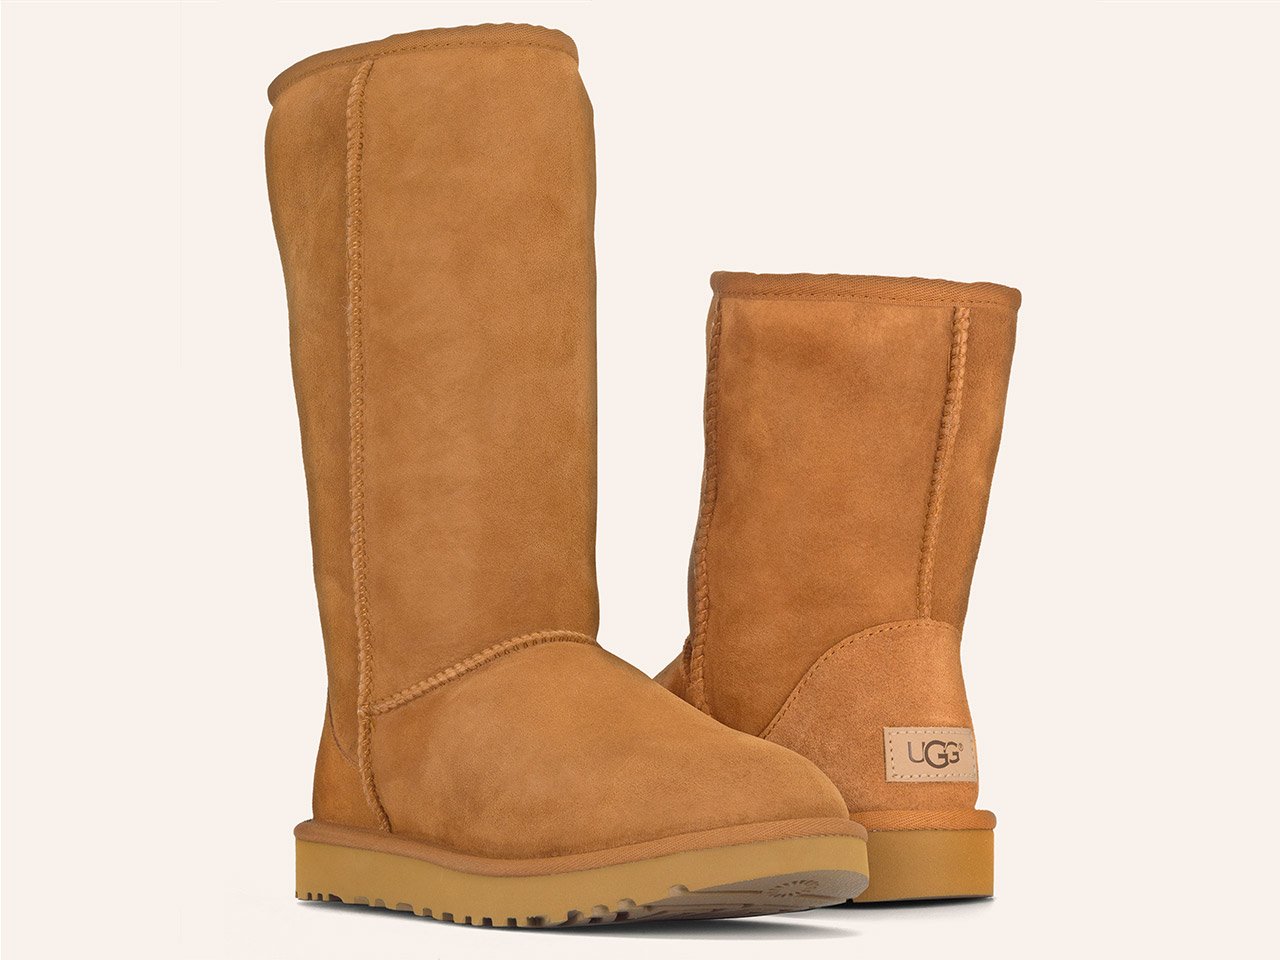 Do UGG Boots Run or Small?